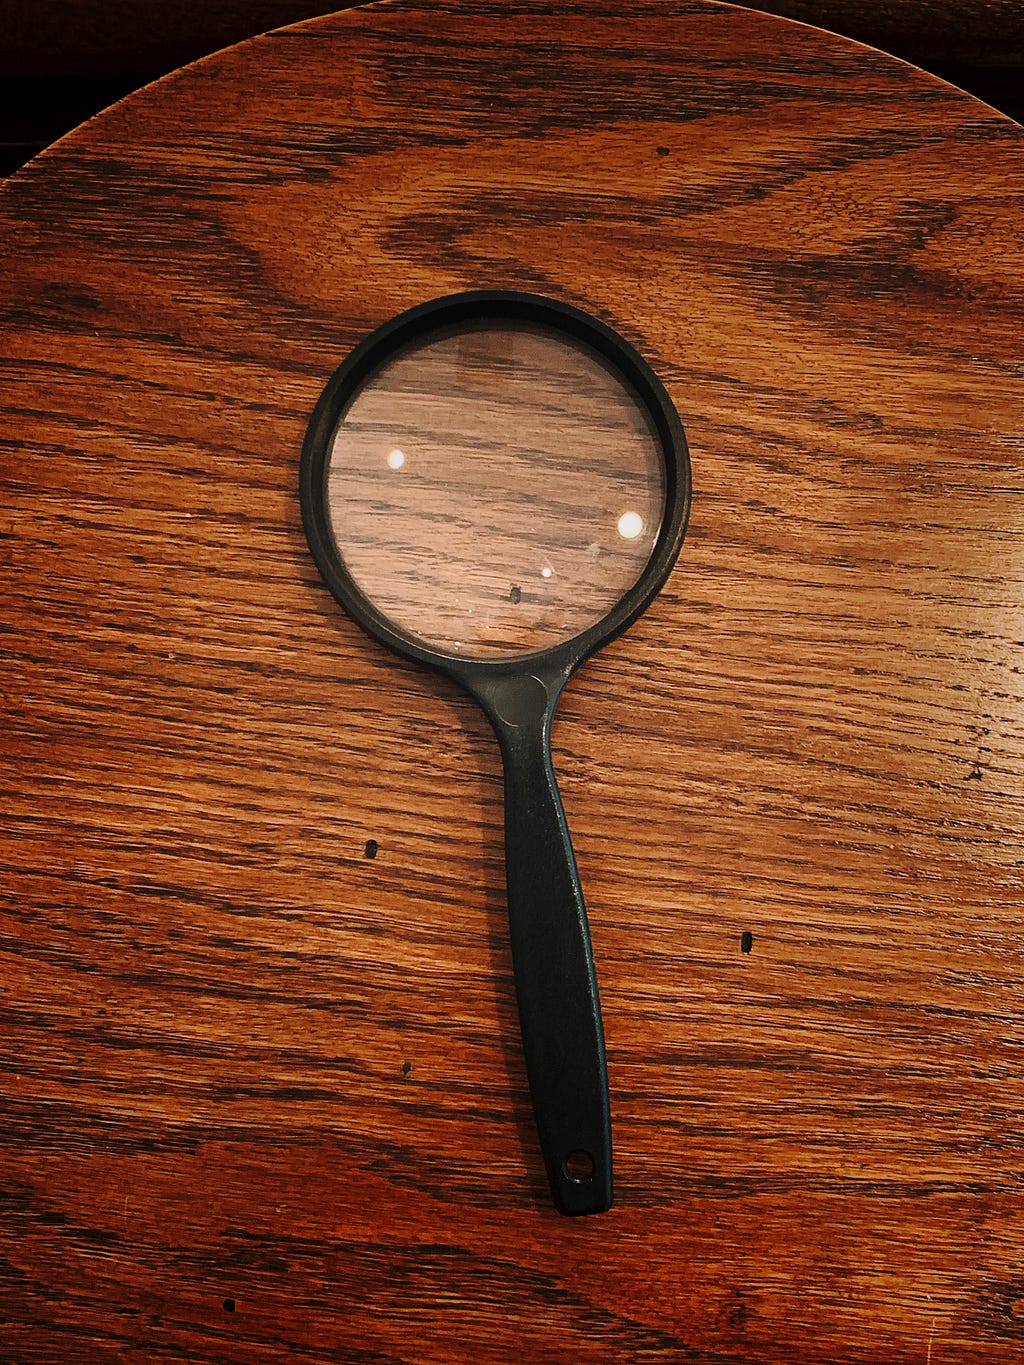 A magnifying glass on a wooden table